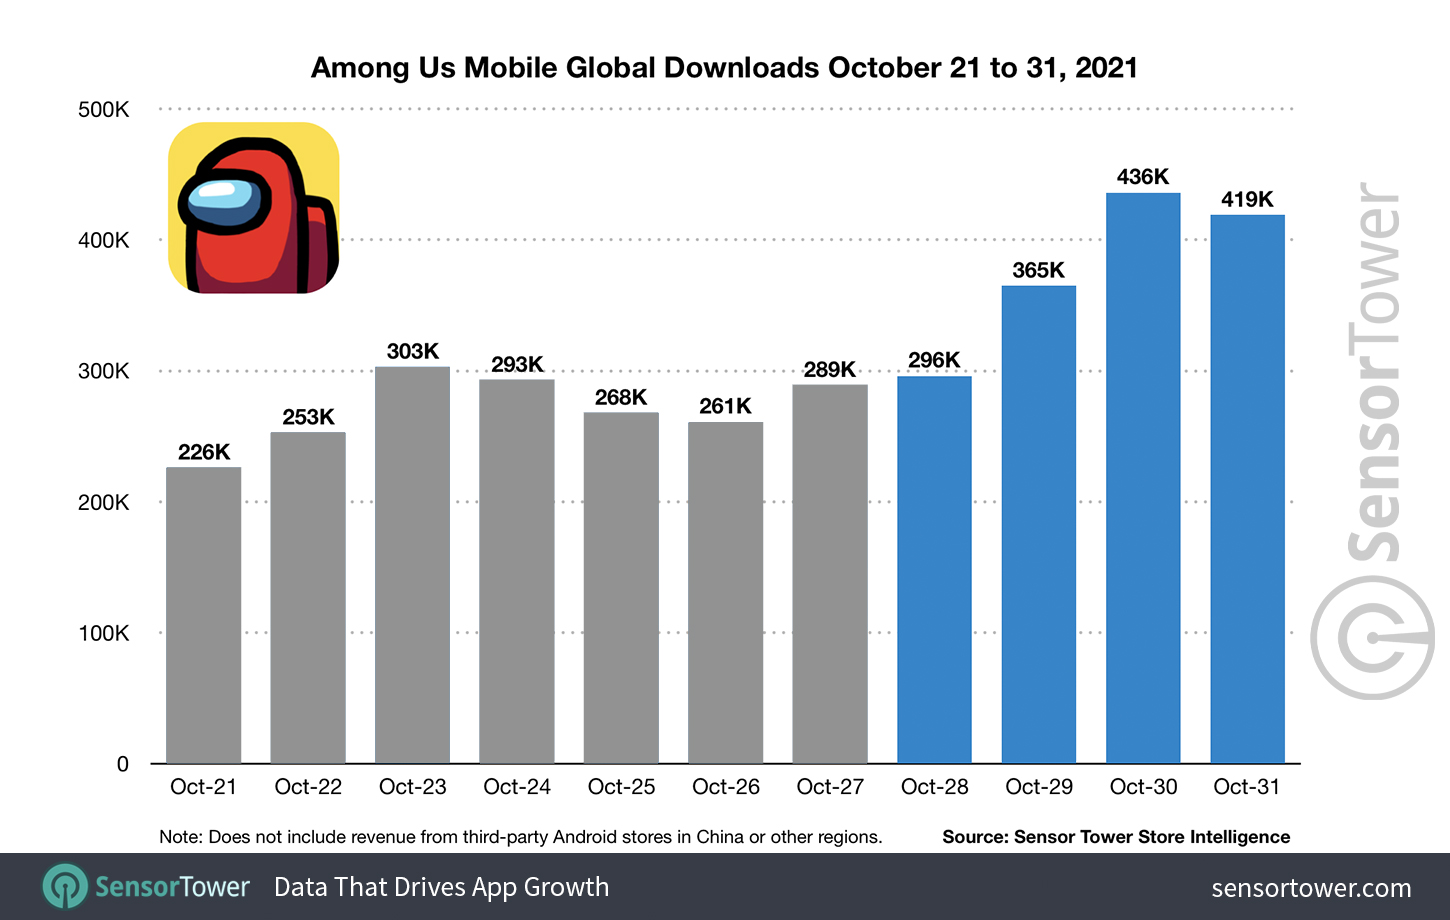 Among Us Mobile Global Downloads October 21 to 31, 2021